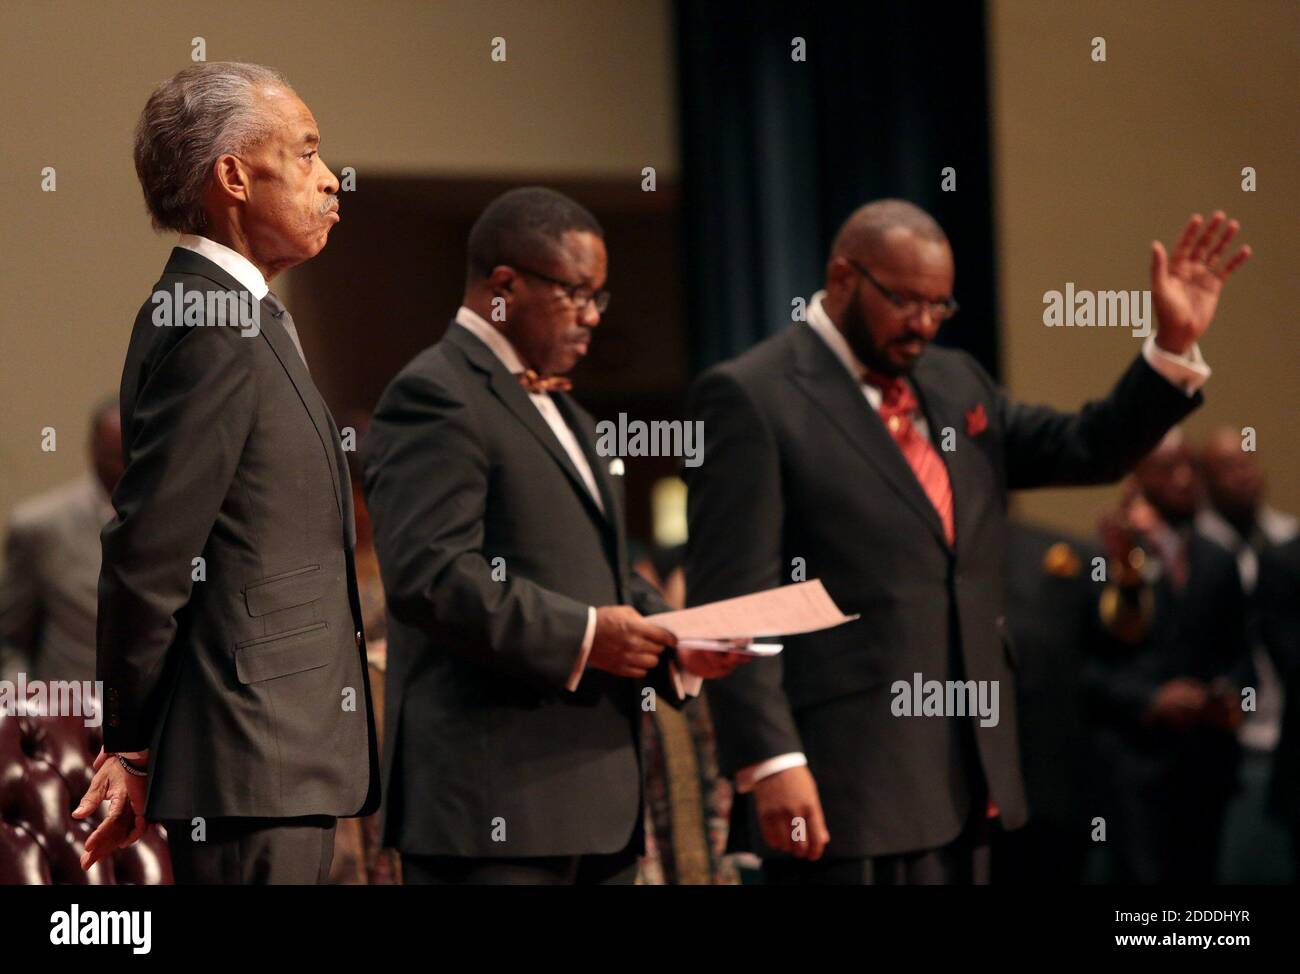 NO FILM, NO VIDEO, NO TV, NO DOCUMENTARY - The Rev. Al Sharpton attends the funeral services for Michael Brown on Monday, August 25, 2014, at Friendly Temple Missionary Baptist Church in St. Louis, MO, USA. Michael Brown, 18, was shot and killed by a Ferguson police officer on August 9, 2014. Photo by Robert Cohen/St. Louis Post-Dispatch/MCT/ABACAPRESS.COM Stock Photo